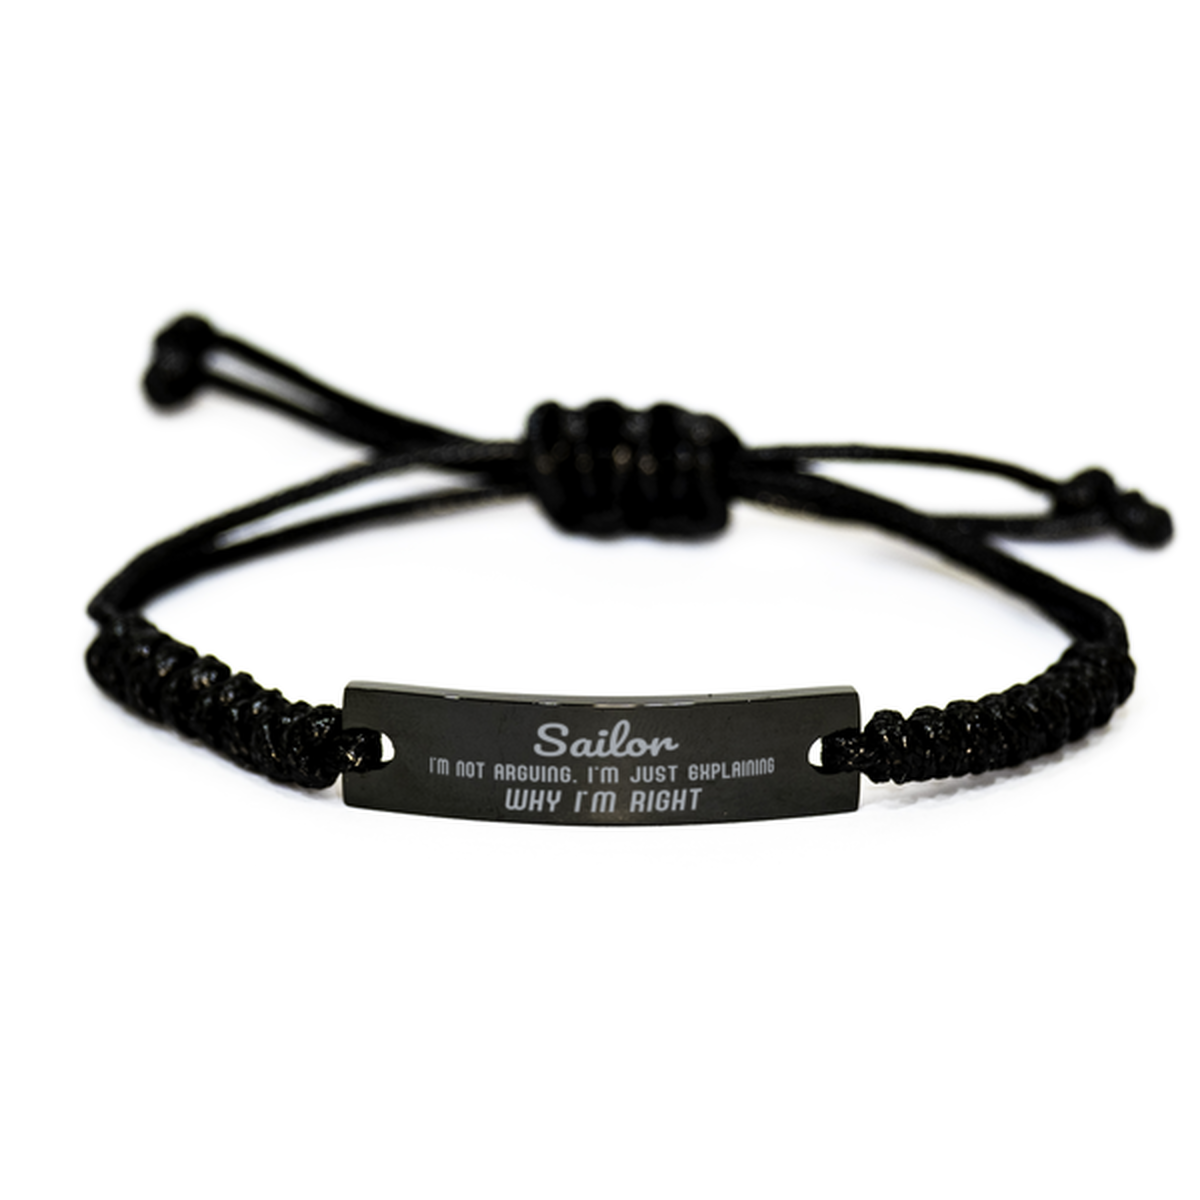 Sailor I'm not Arguing. I'm Just Explaining Why I'm RIGHT Black Rope Bracelet, Funny Saying Quote Sailor Gifts For Sailor Graduation Birthday Christmas Gifts for Men Women Coworker